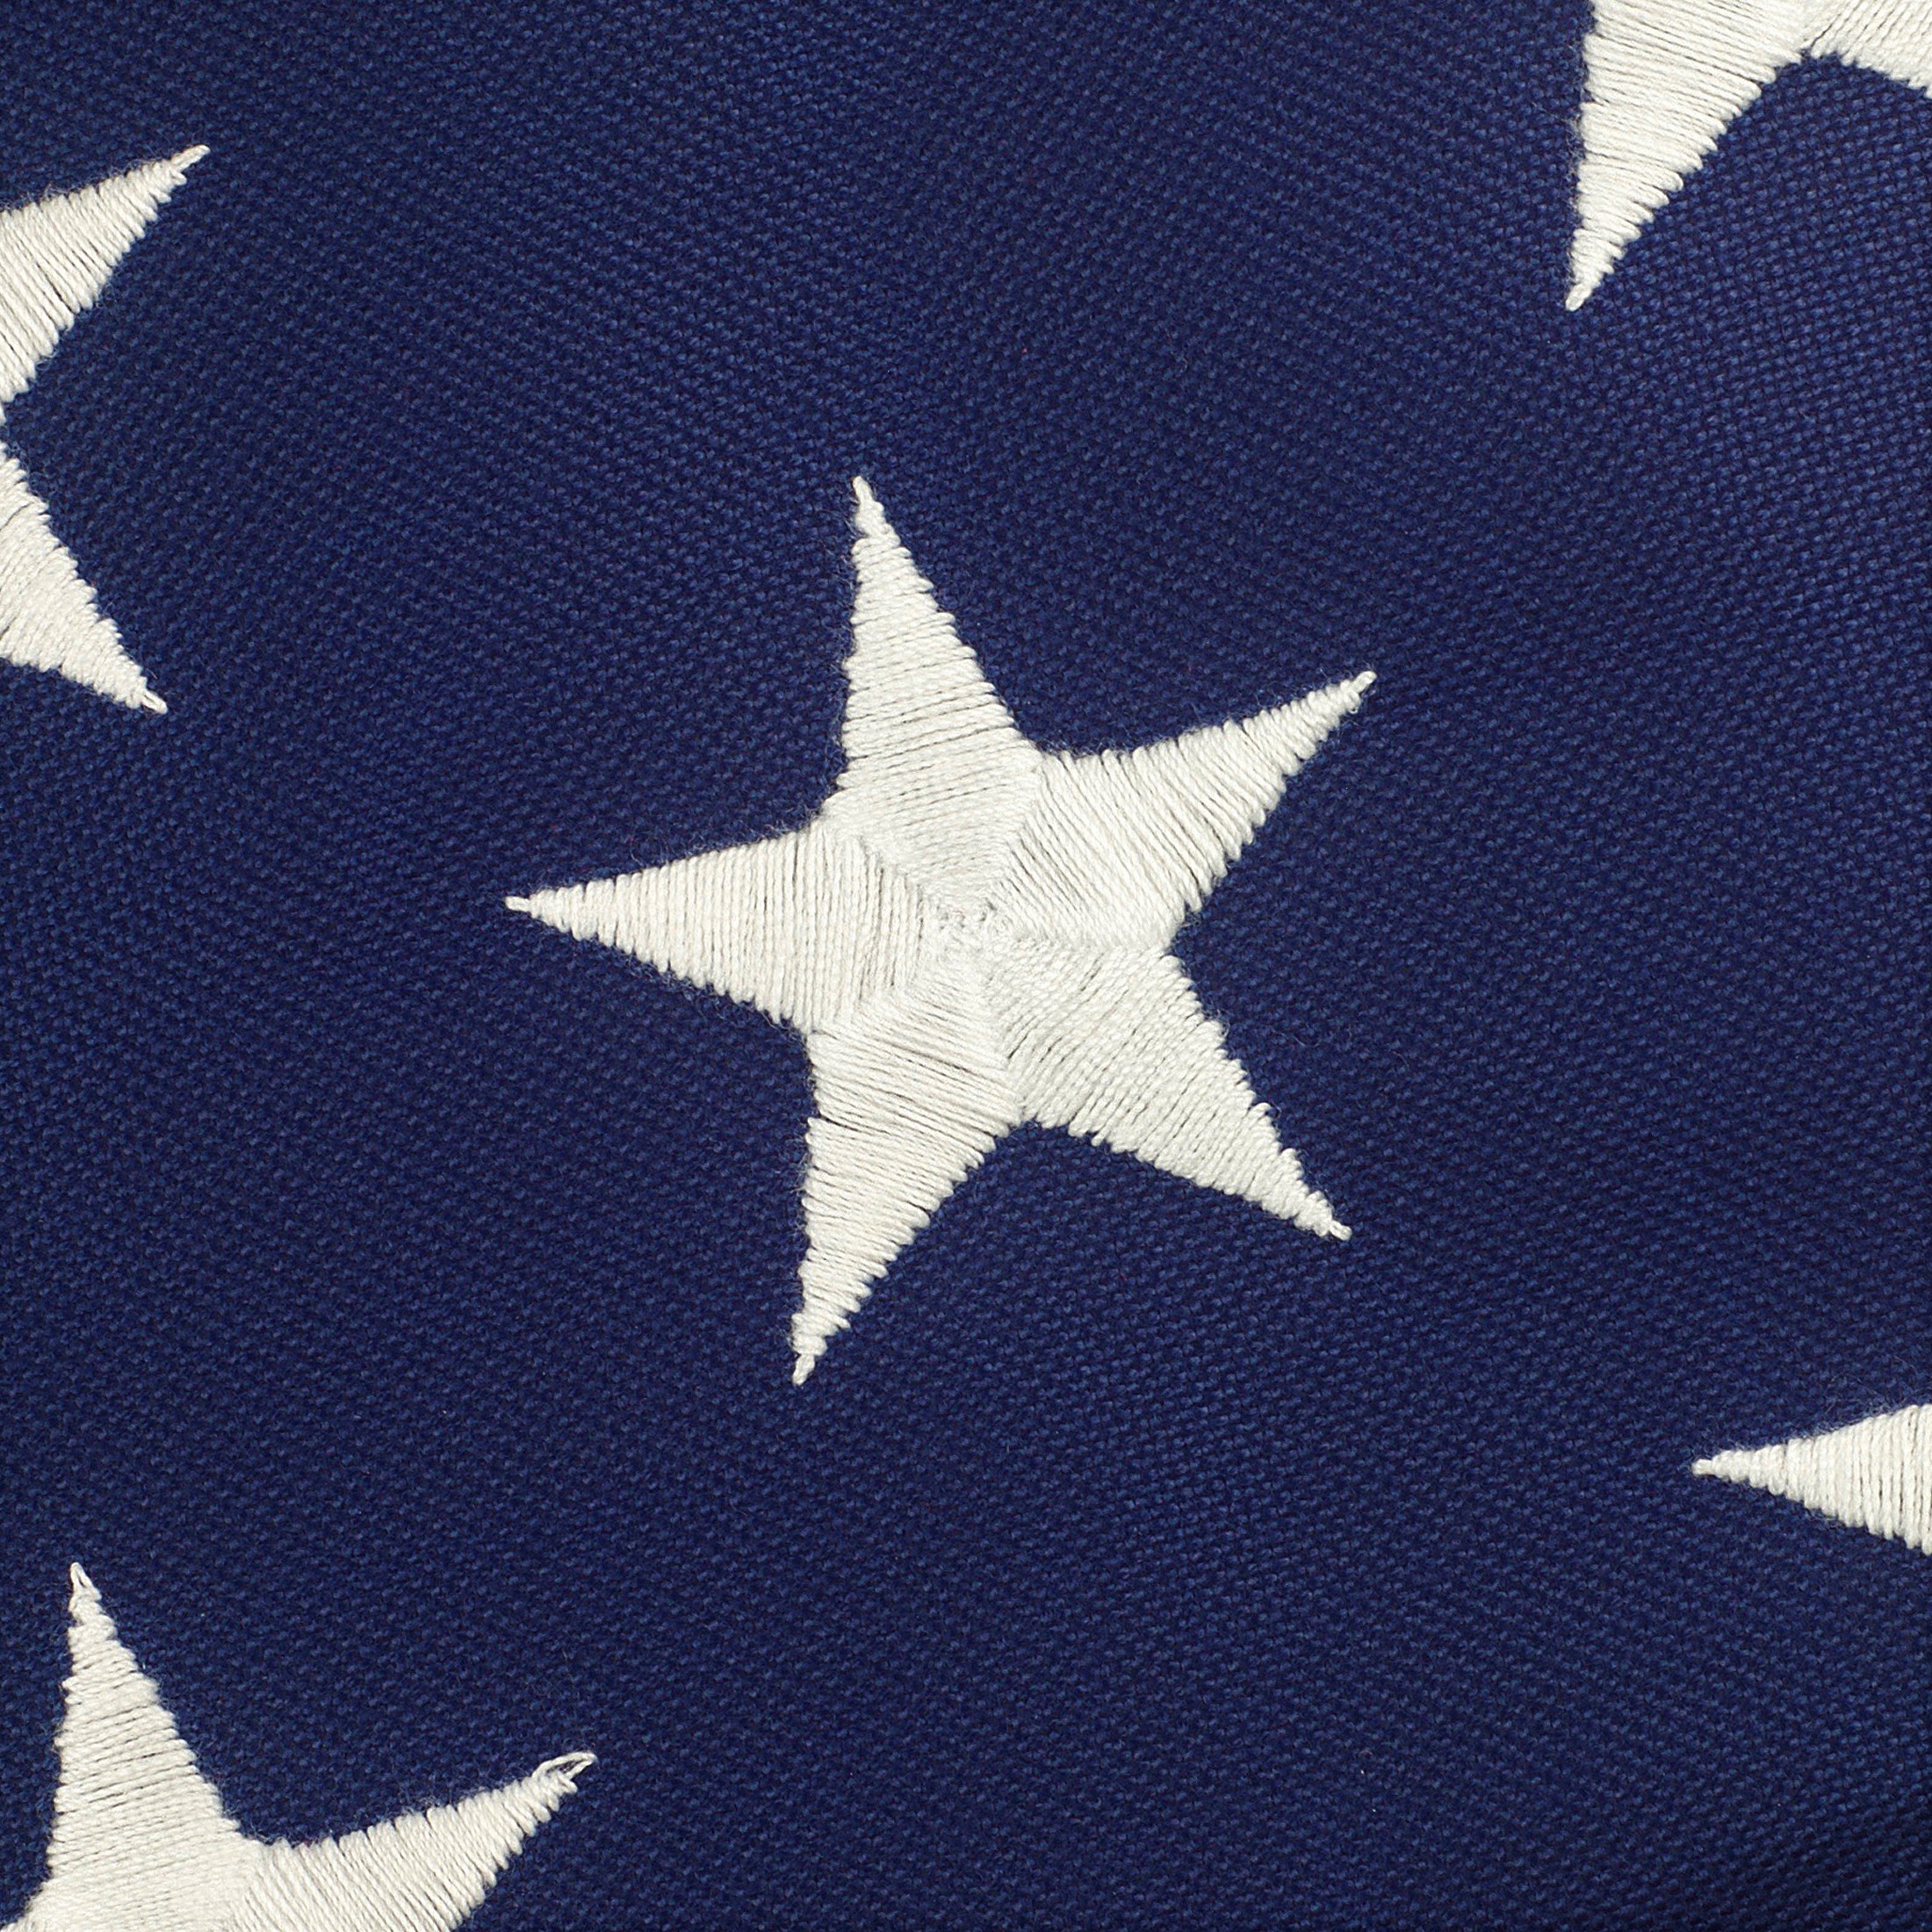 Tough-Tex American Flag with Sewn Stripes and Embroidered Stars by Annin, 3' x 5' - image 3 of 6